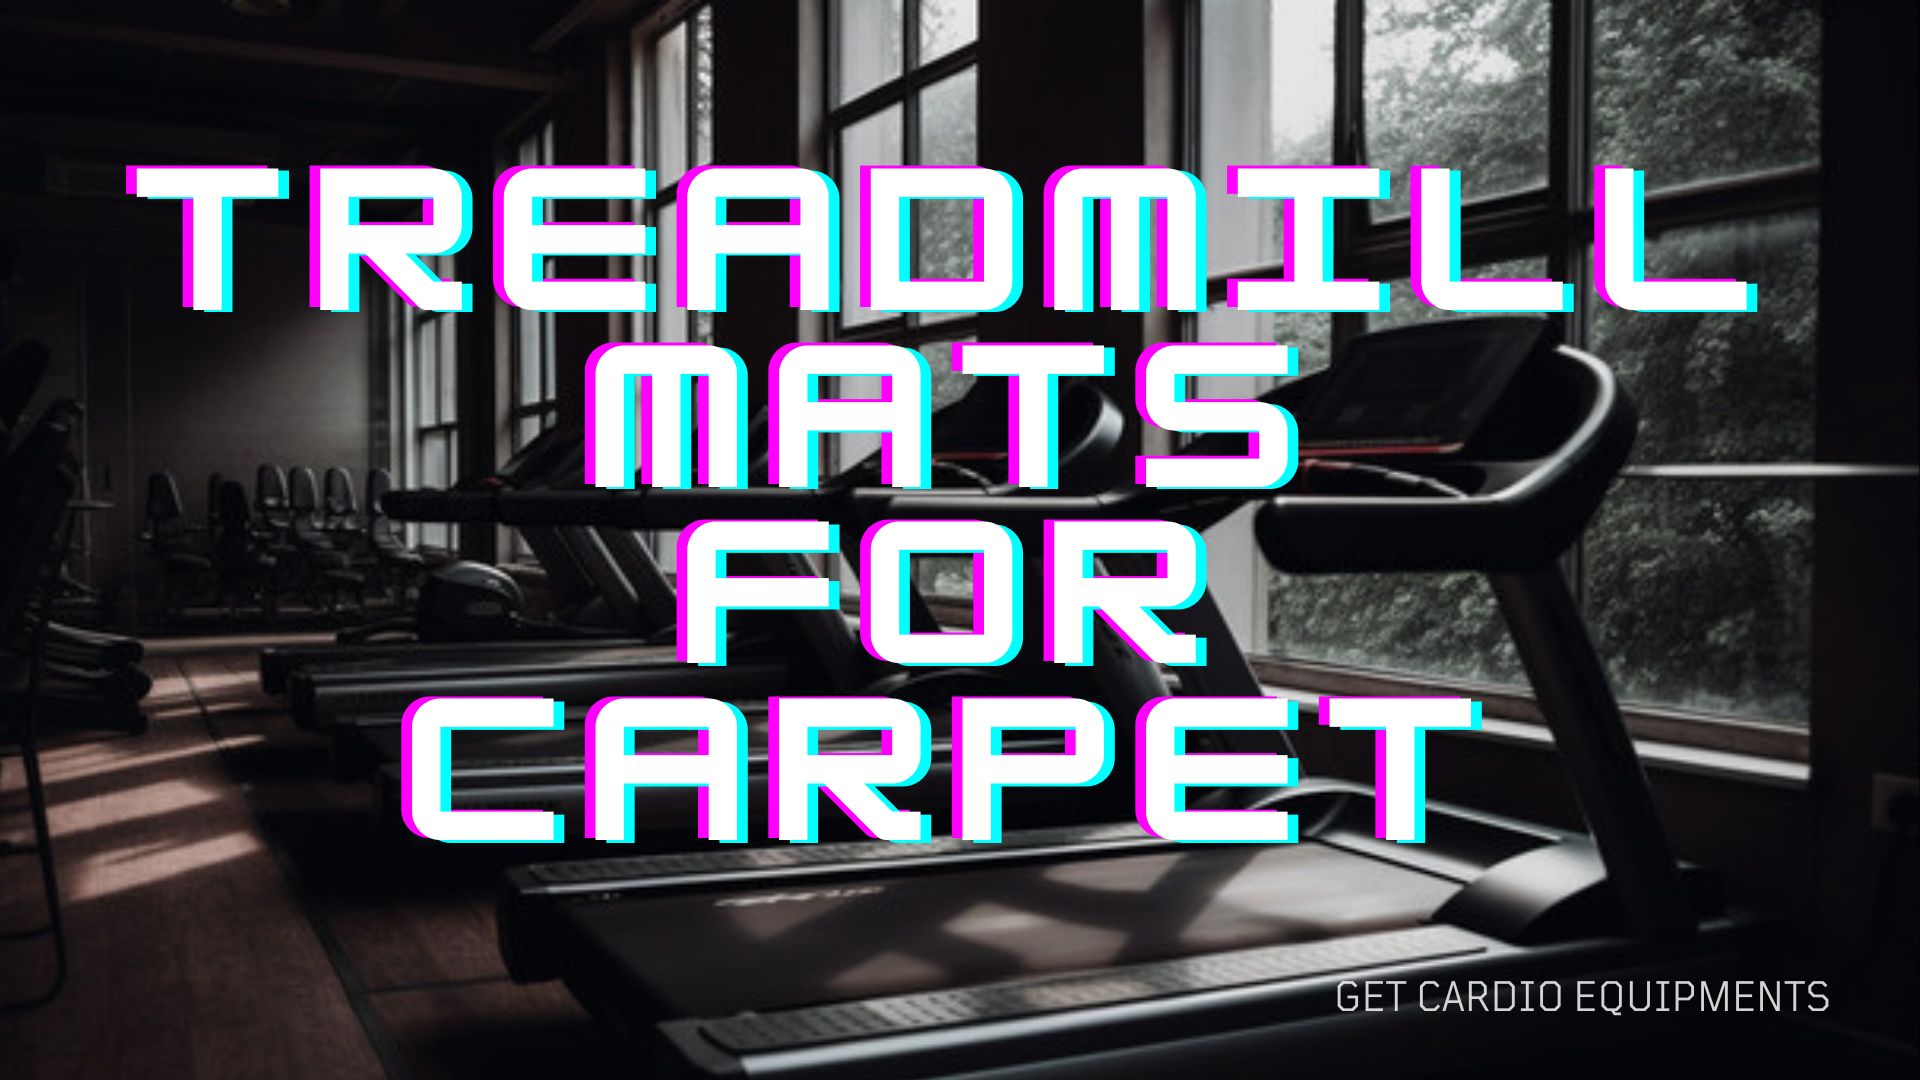 Best Treadmill Mat for Carpet: Protect Your Floors